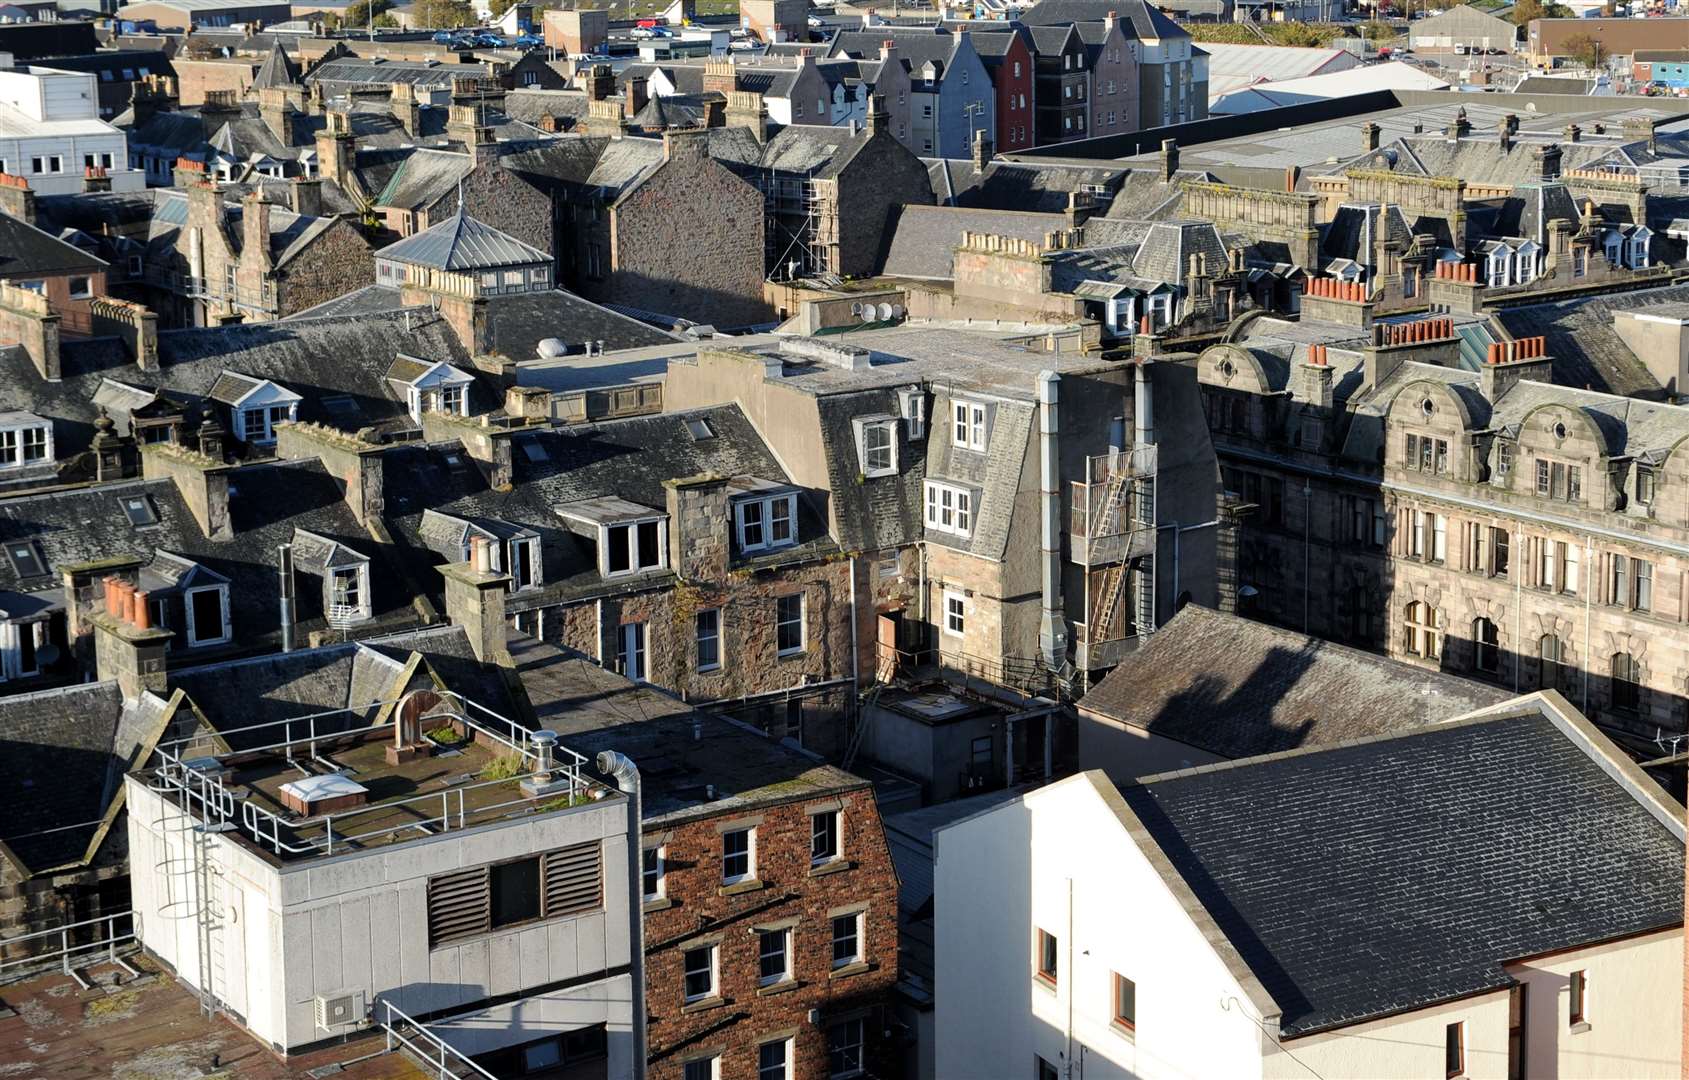 The population of Inverness would grow if all the proposed new housing is occupied.